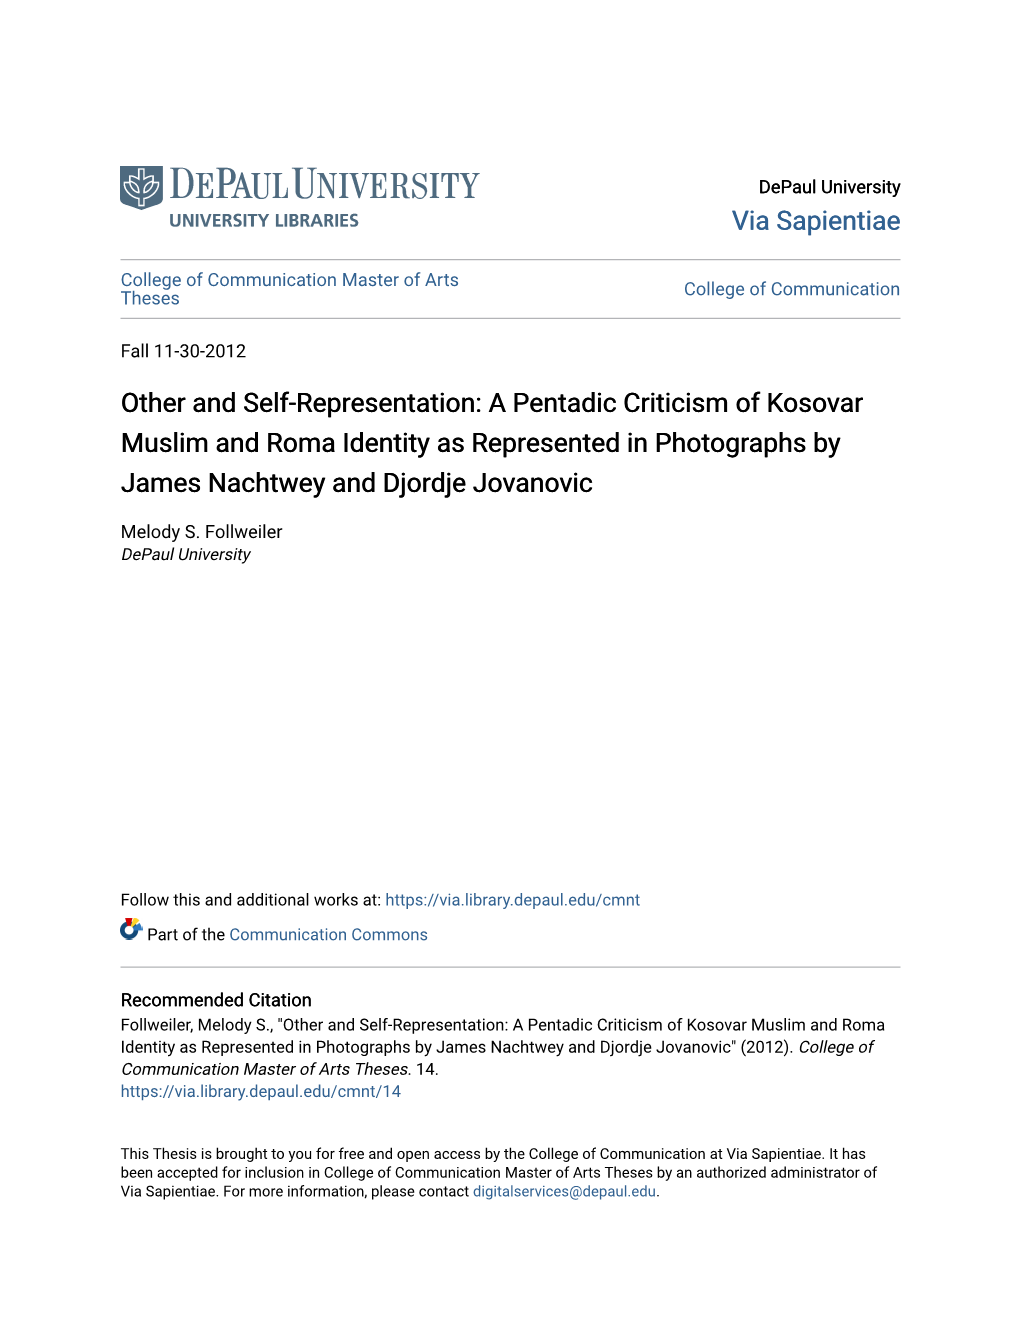 A Pentadic Criticism of Kosovar Muslim and Roma Identity As Represented in Photographs by James Nachtwey and Djordje Jovanovic